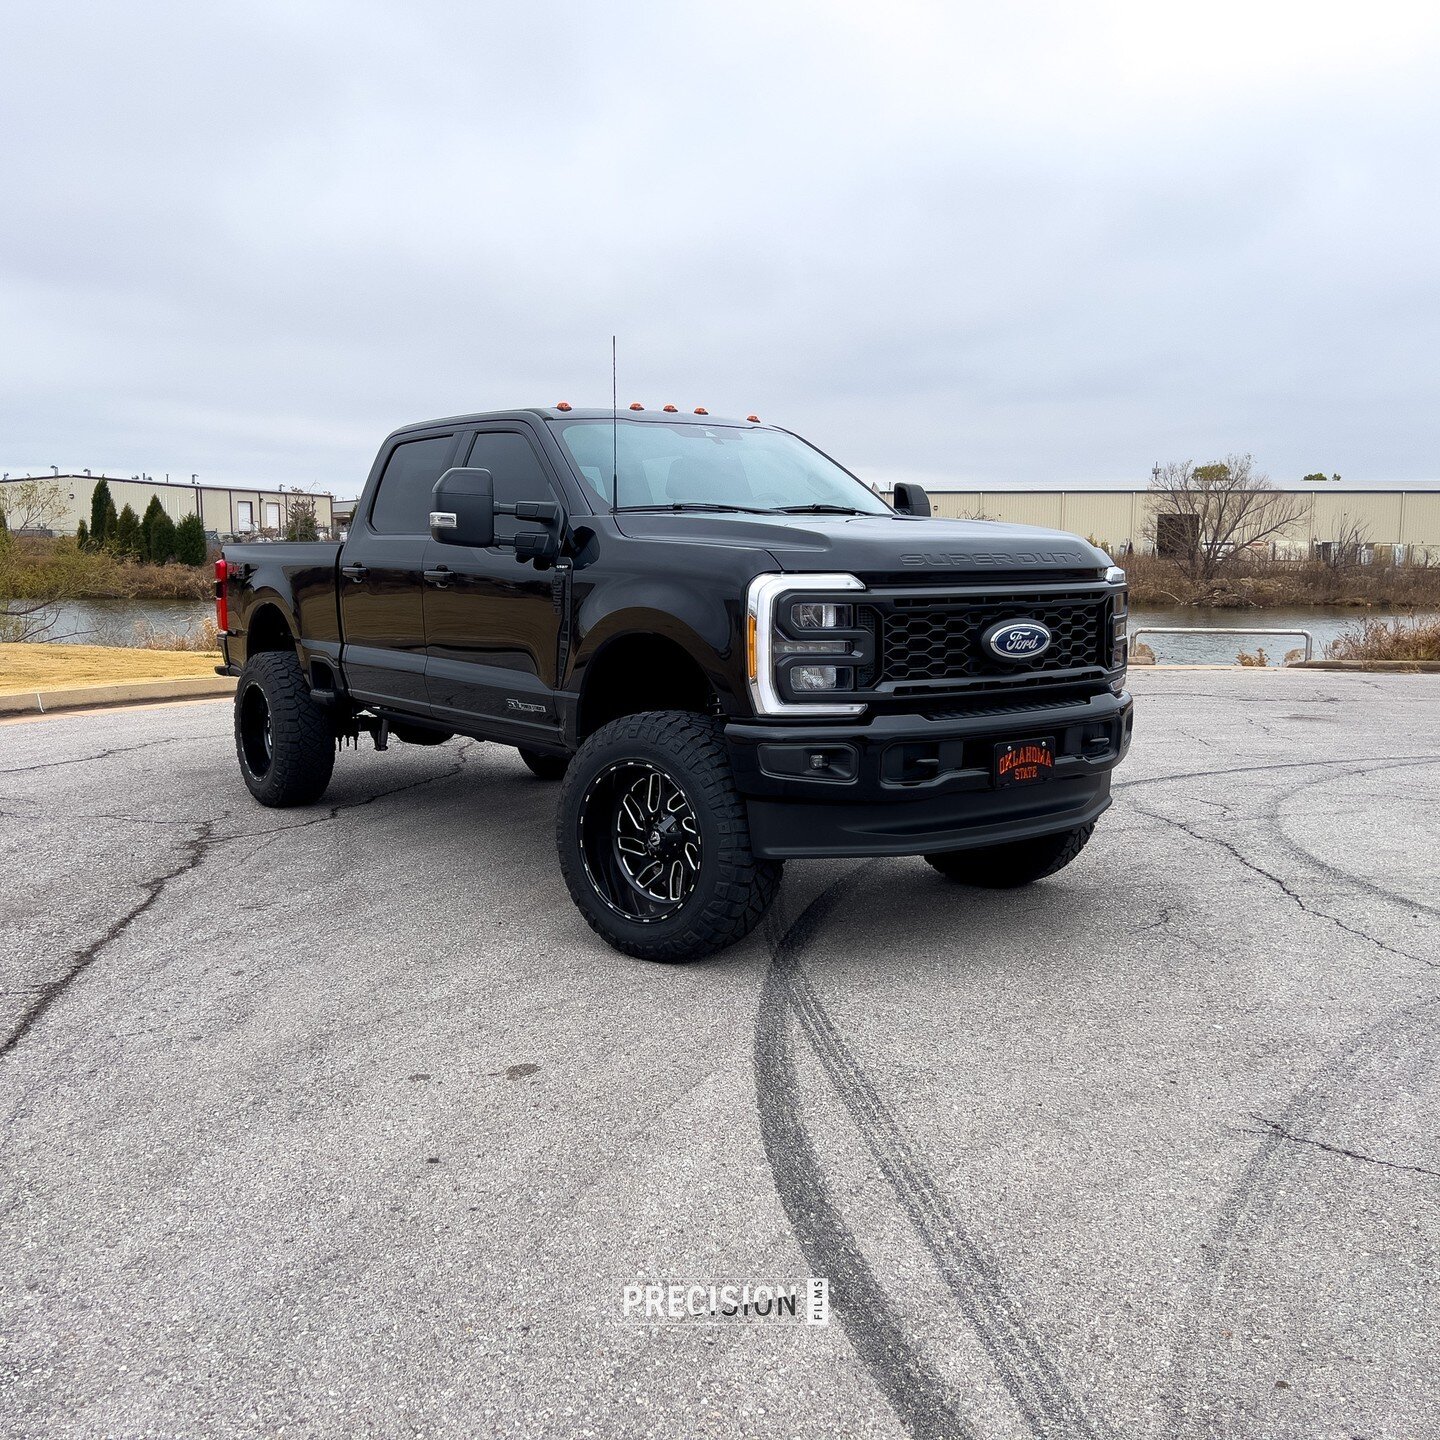 This F250 is ready to off road after our team installed front end PPF. Rock chips and branches are no longer threats for this big truck.

#precisionfilms #luxuyrestyling #ppf #clearbra #windowtint #paintprotectionfilm #okc